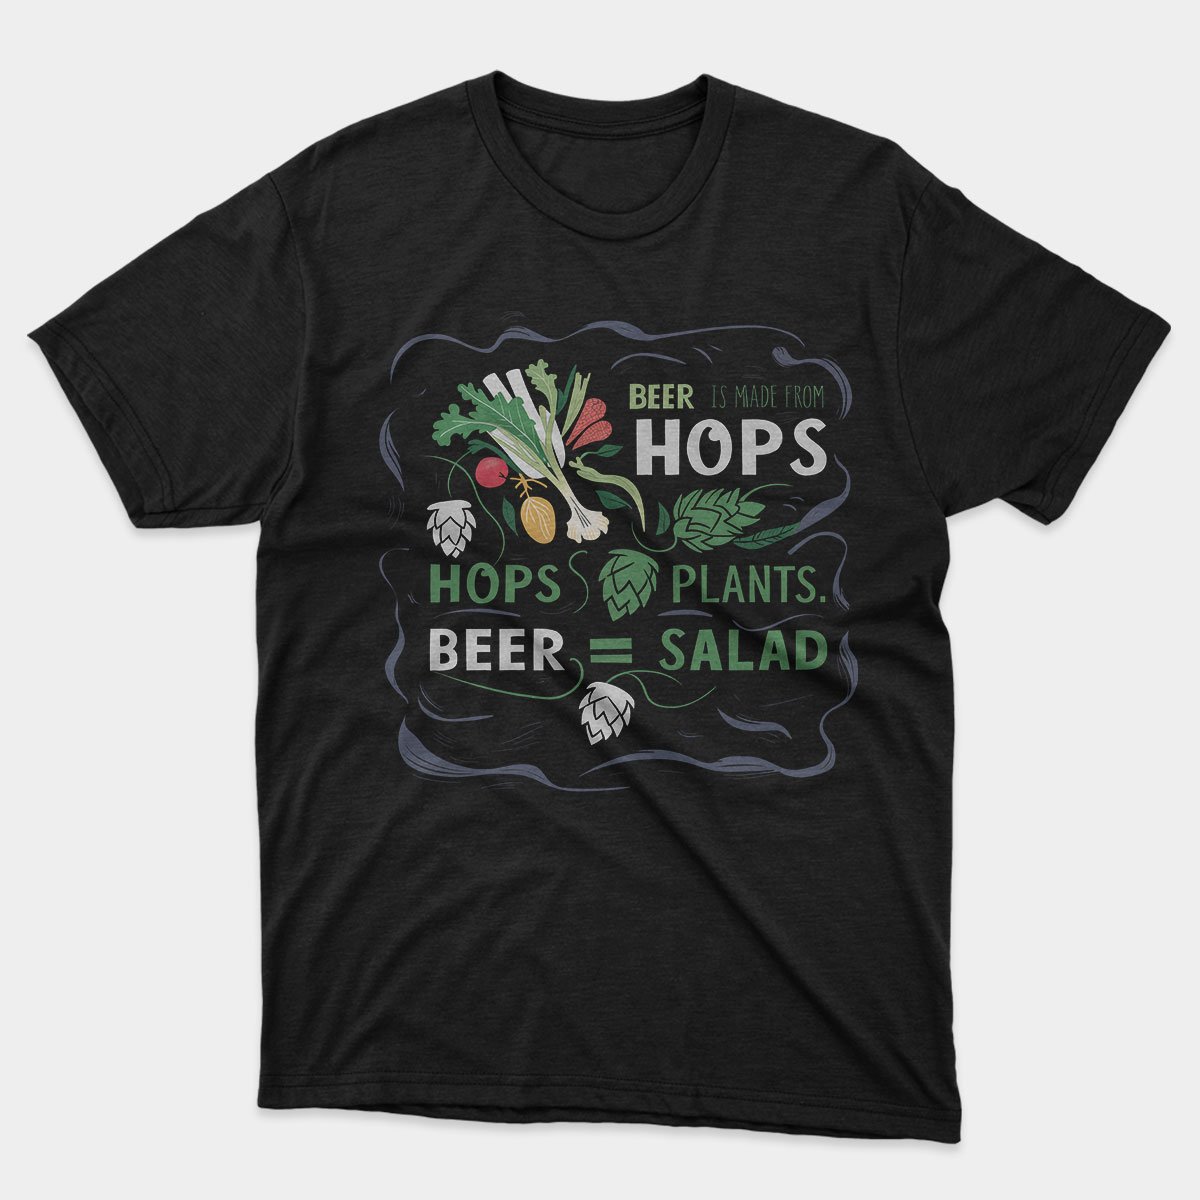 Beer Is From Hops Beer Equals Salad T-shirt